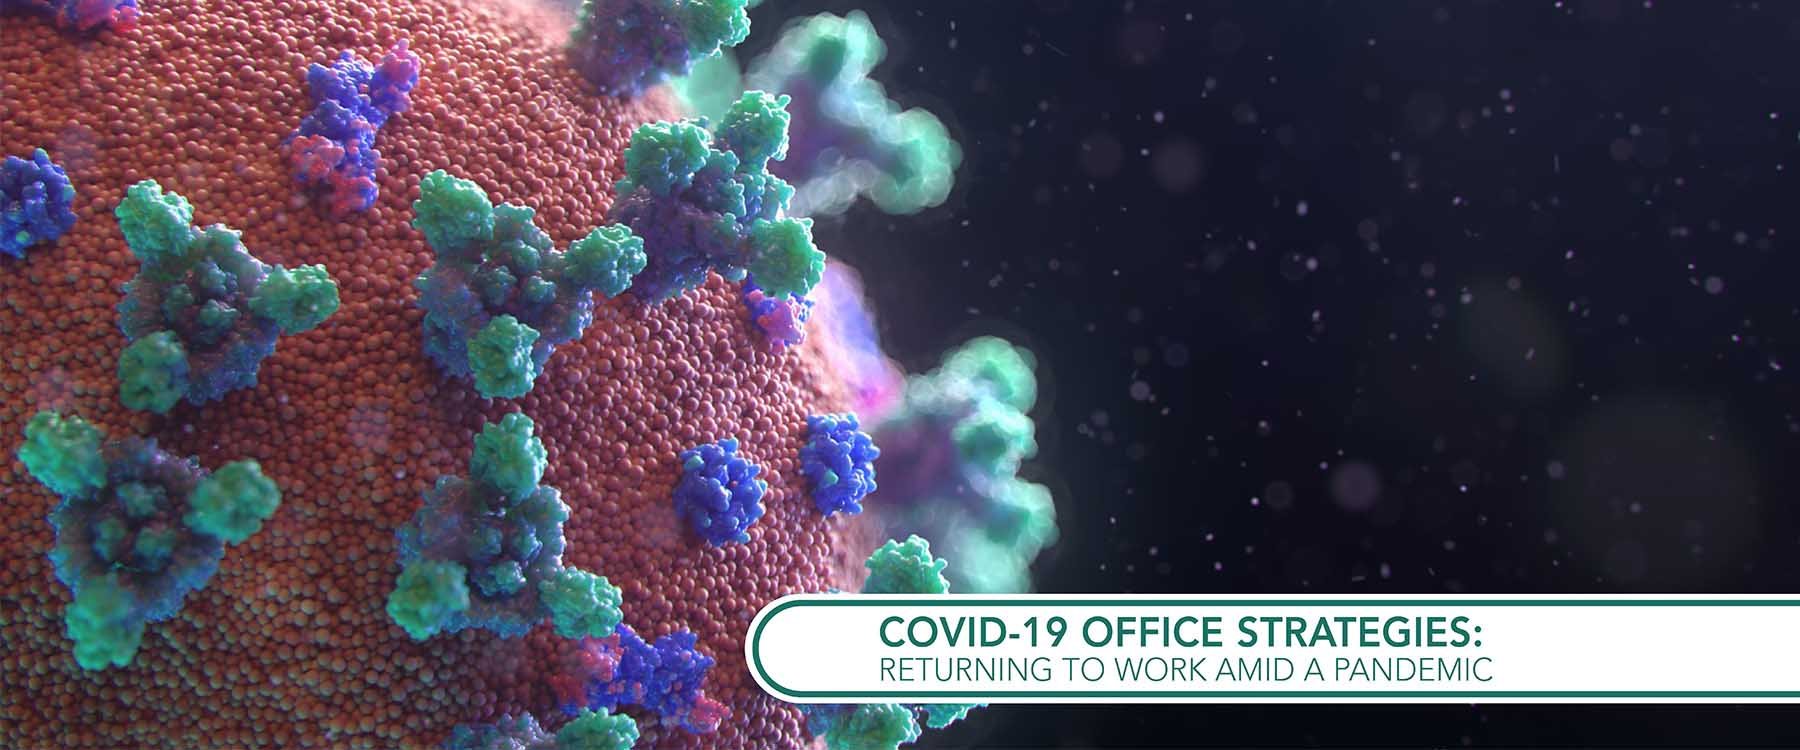 Covid19 office strategies returning to work amid a pandemic by Michael Brush